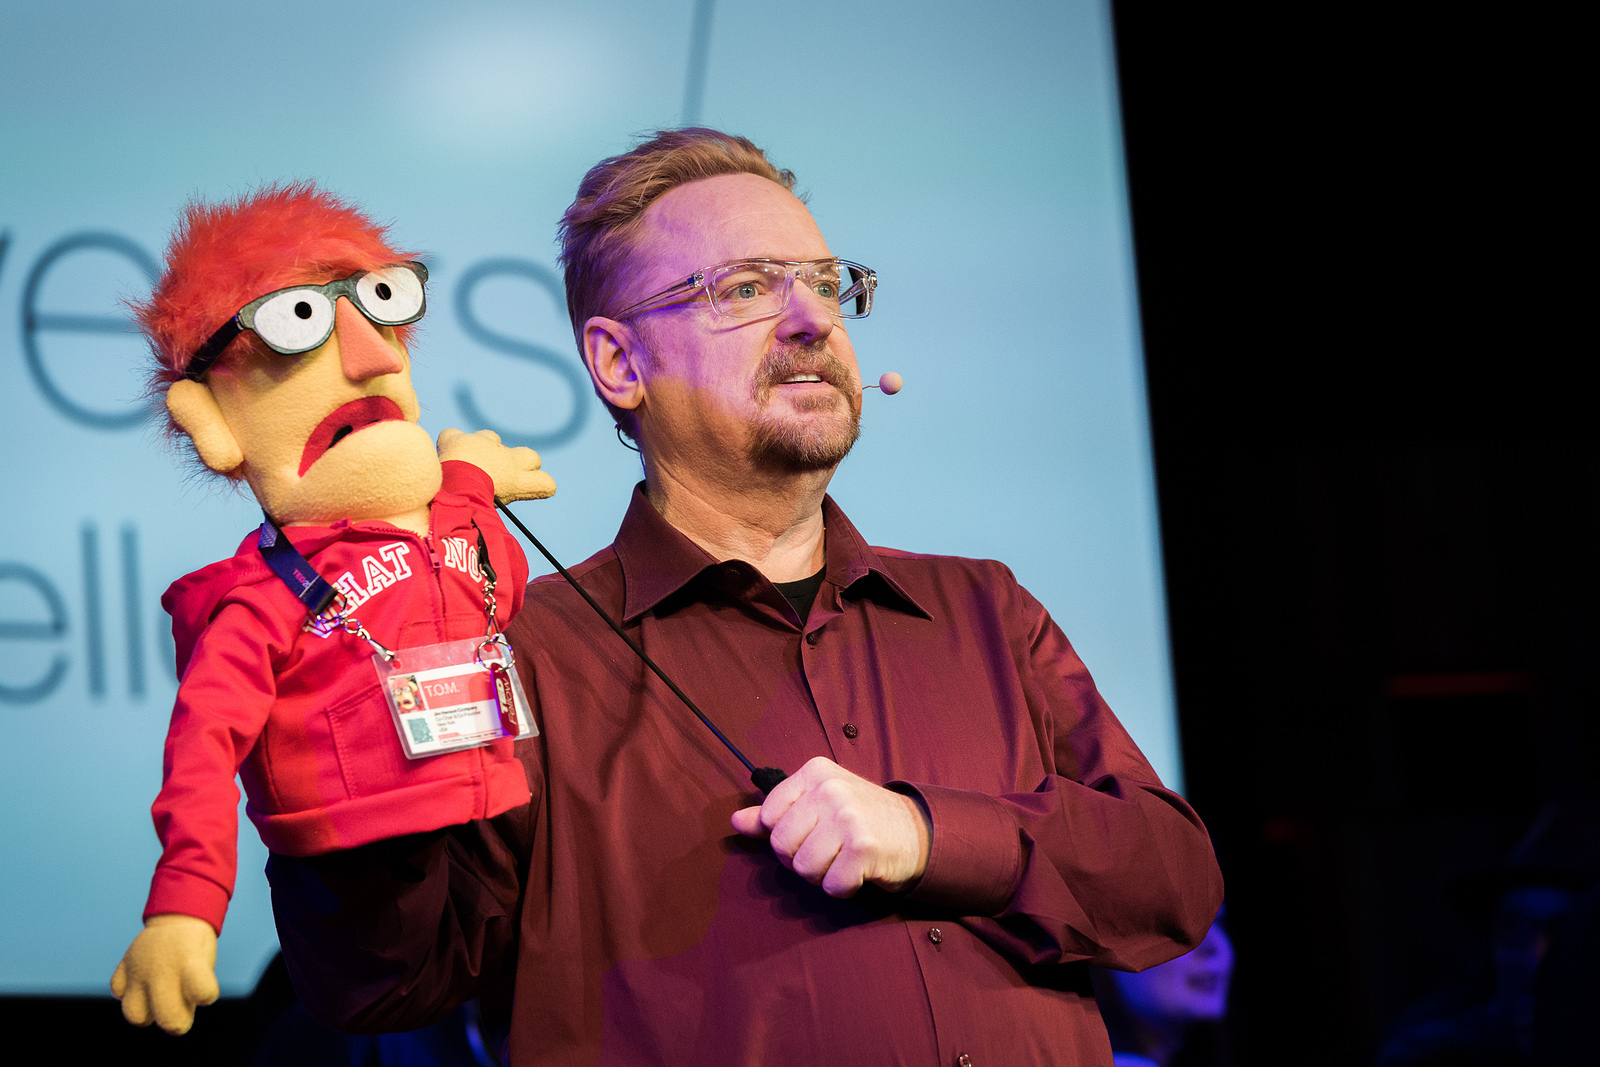 TED's own Tom Reilly is gifted with a puppet of himself during the TED Fellows sessions. Last summer, he presented a similar puppet to Fellow Asha de Vos. Photo: Ryan Lash